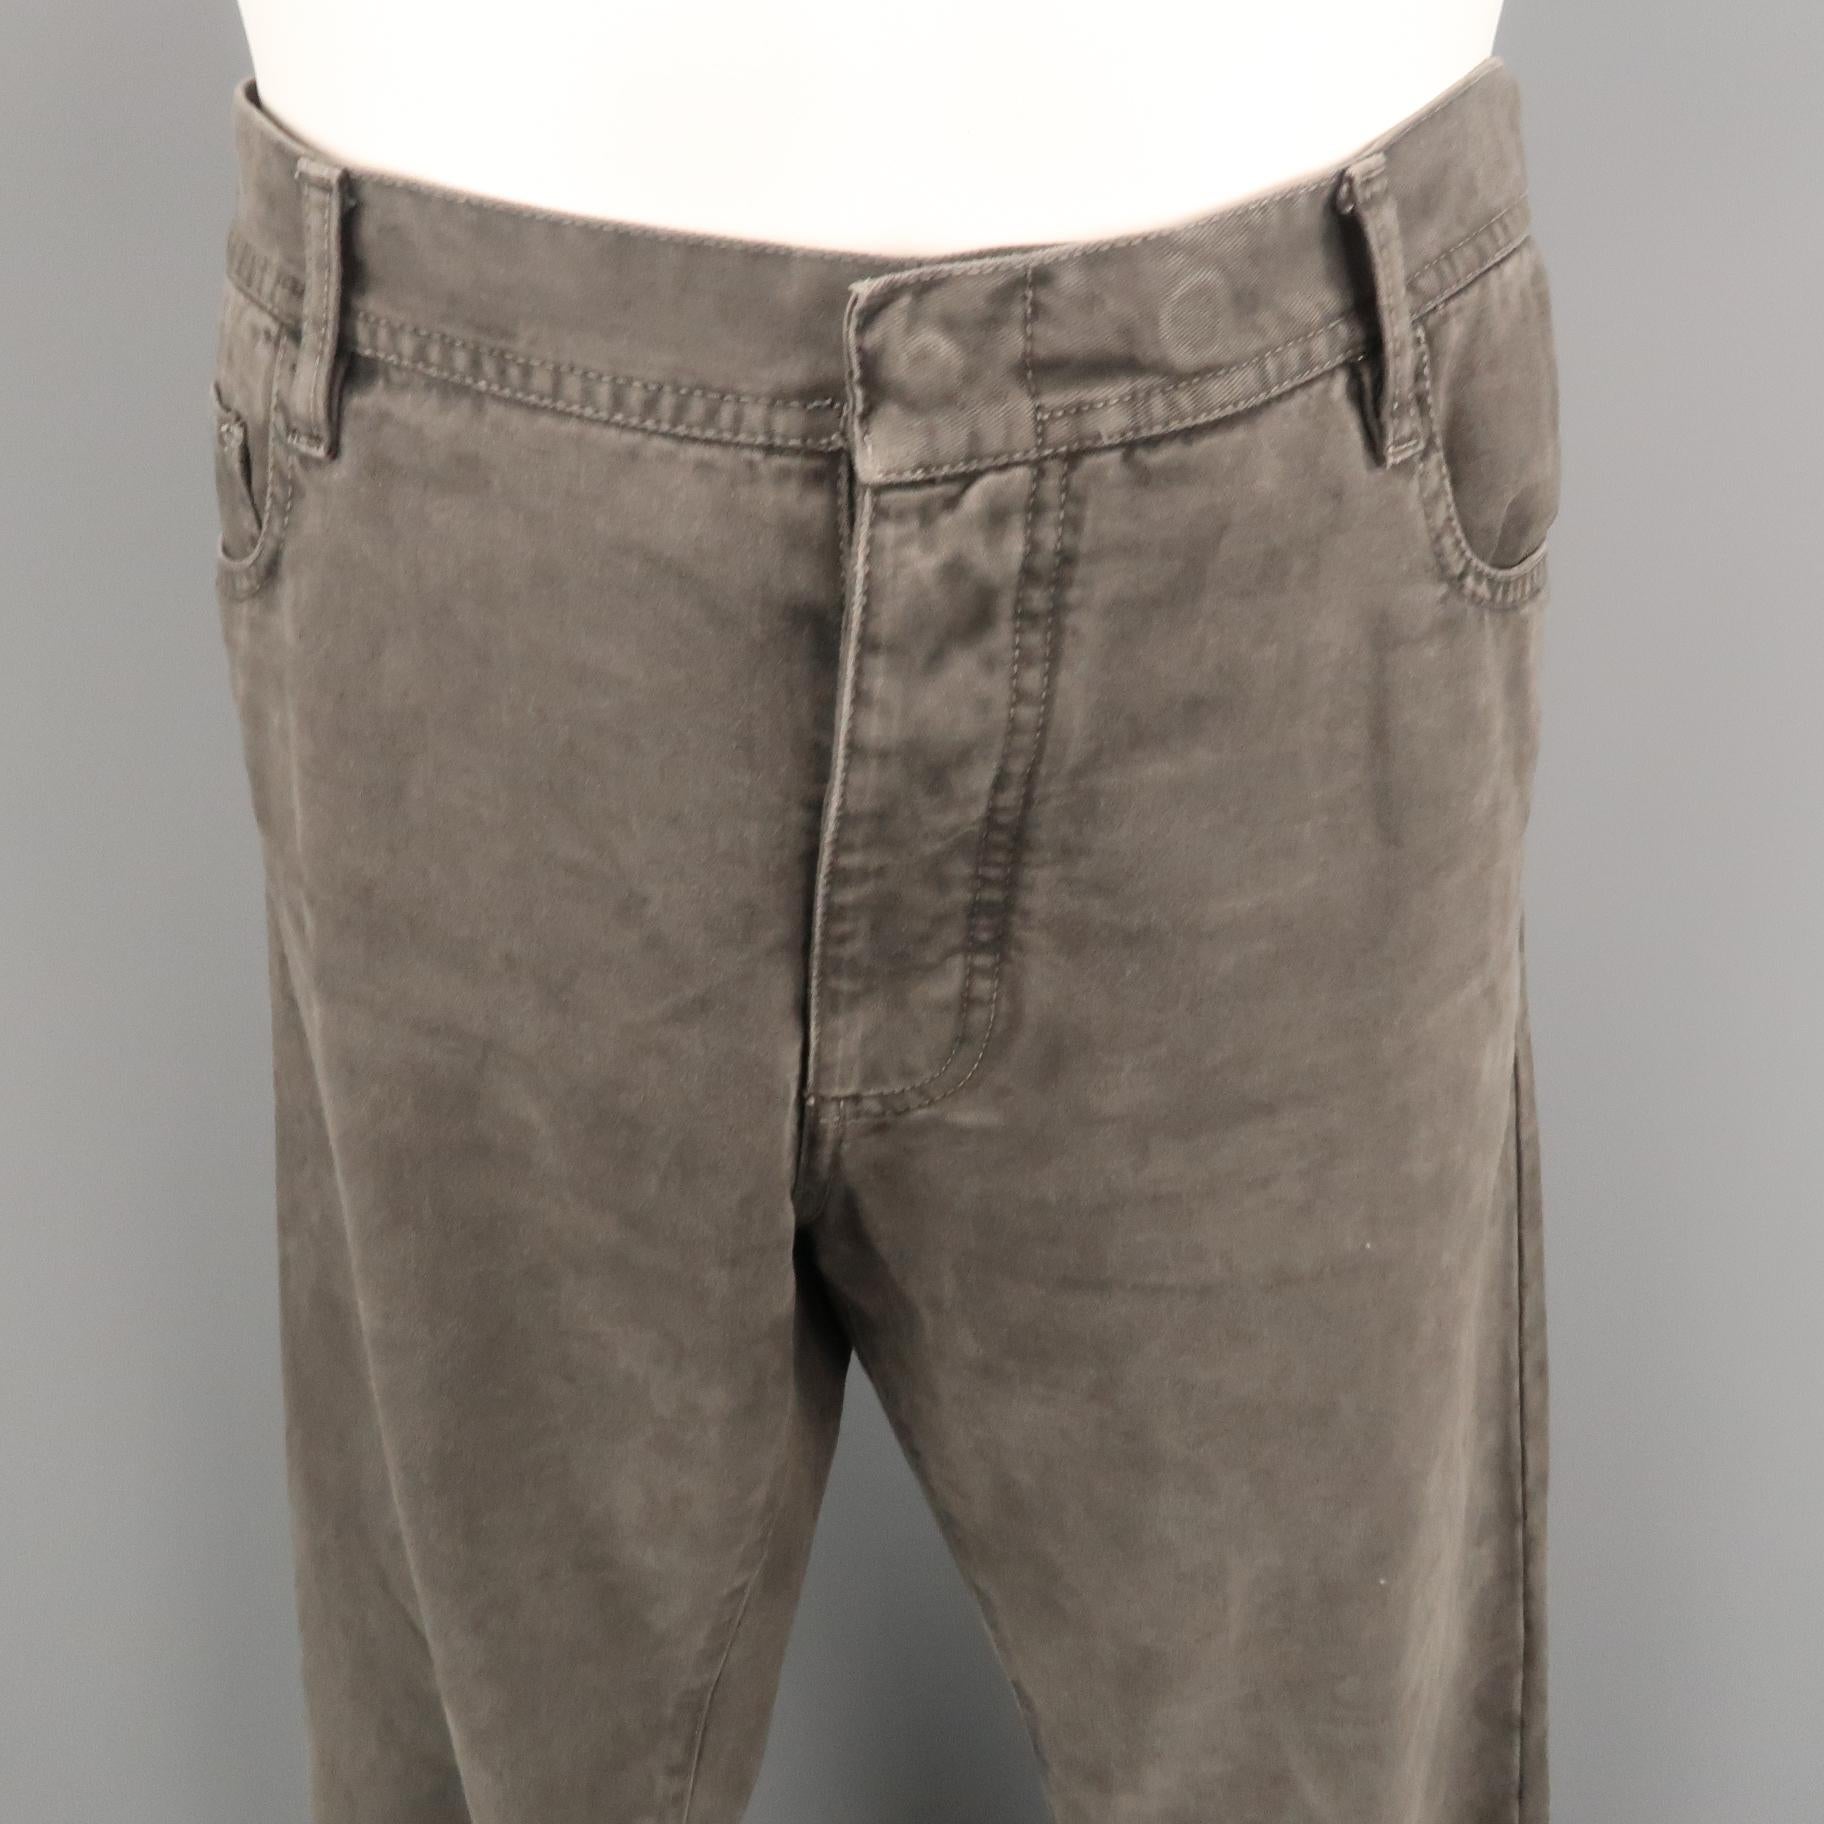 NICOLAS A. TARALIS casual pant comes in a gray cotton featuring a regular fit style. Made in Italy.
 
Excellent Pre-Owned Condition.
Marked: 34
 
Measurements:
 
Waist: 36 in.
Rise: 9.5 in.
Inseam: 38 in.
